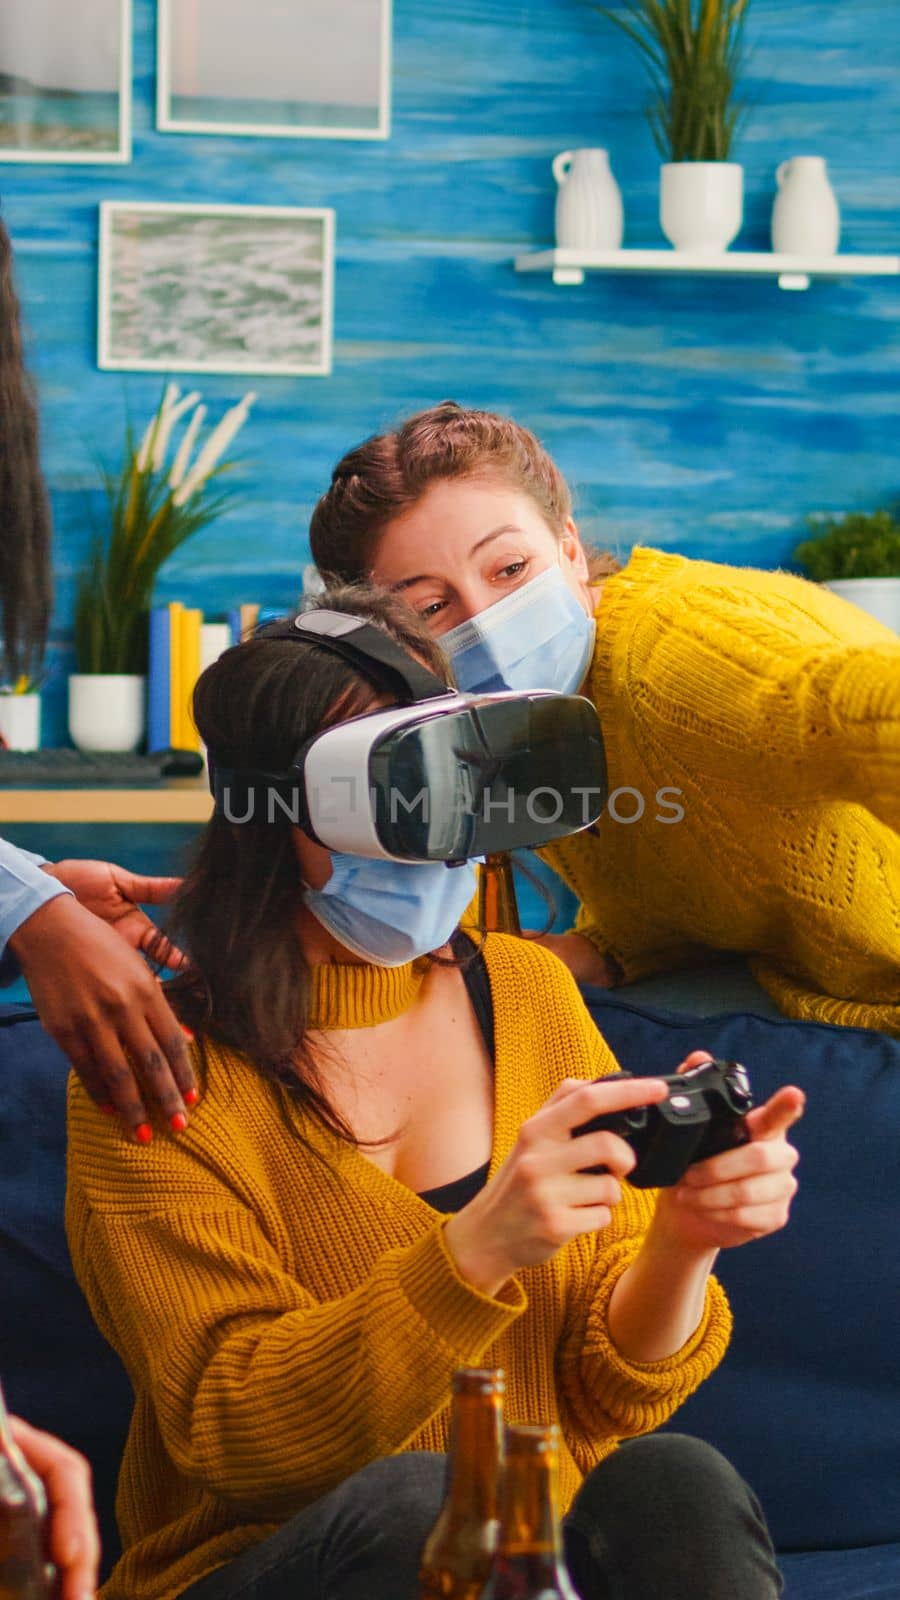 Woman playing video games wearing vr headset and multiethnic friends guiding her keeping social distancing during social pandemic. Diverse people having fun at new normal party experiencing googles